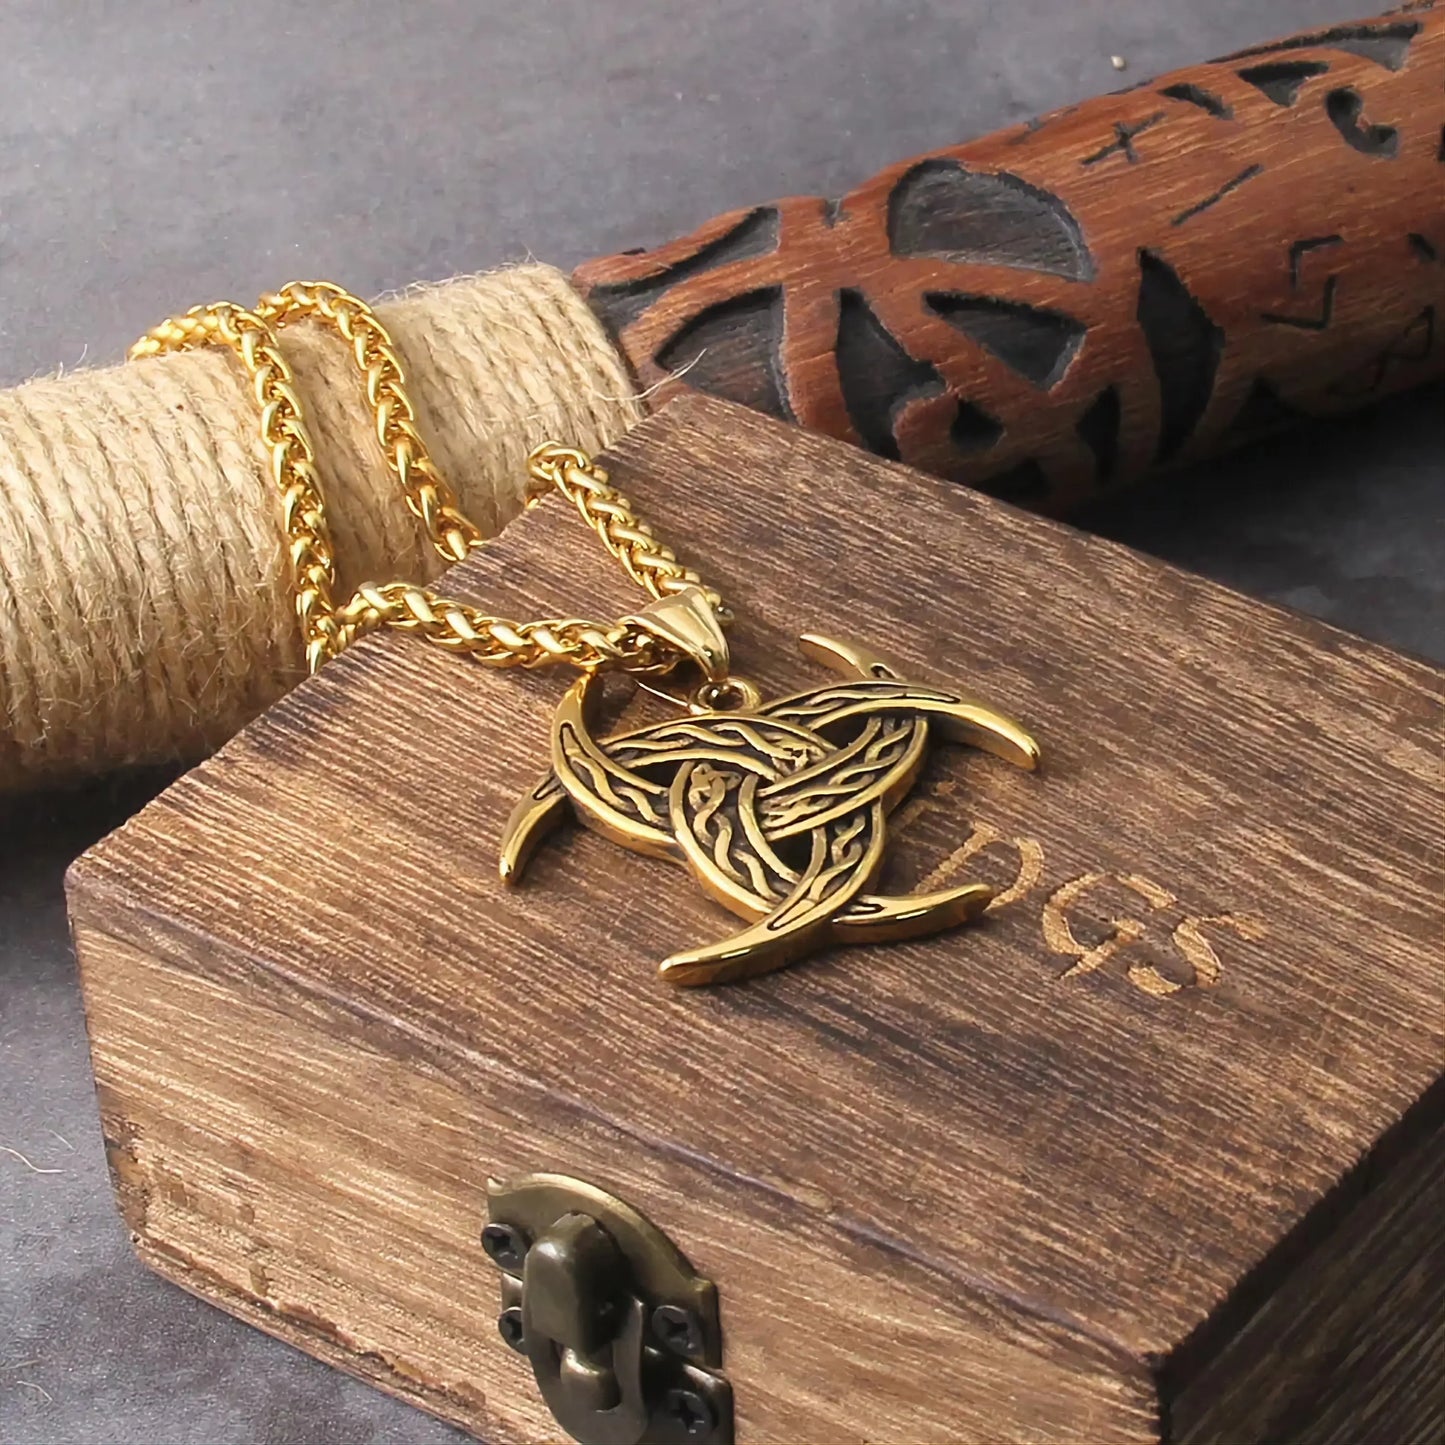 Gold Viking Trinity Pendant Necklace with Free Box and Gift Bag Steel Jewelry Necklace JettsJewelers